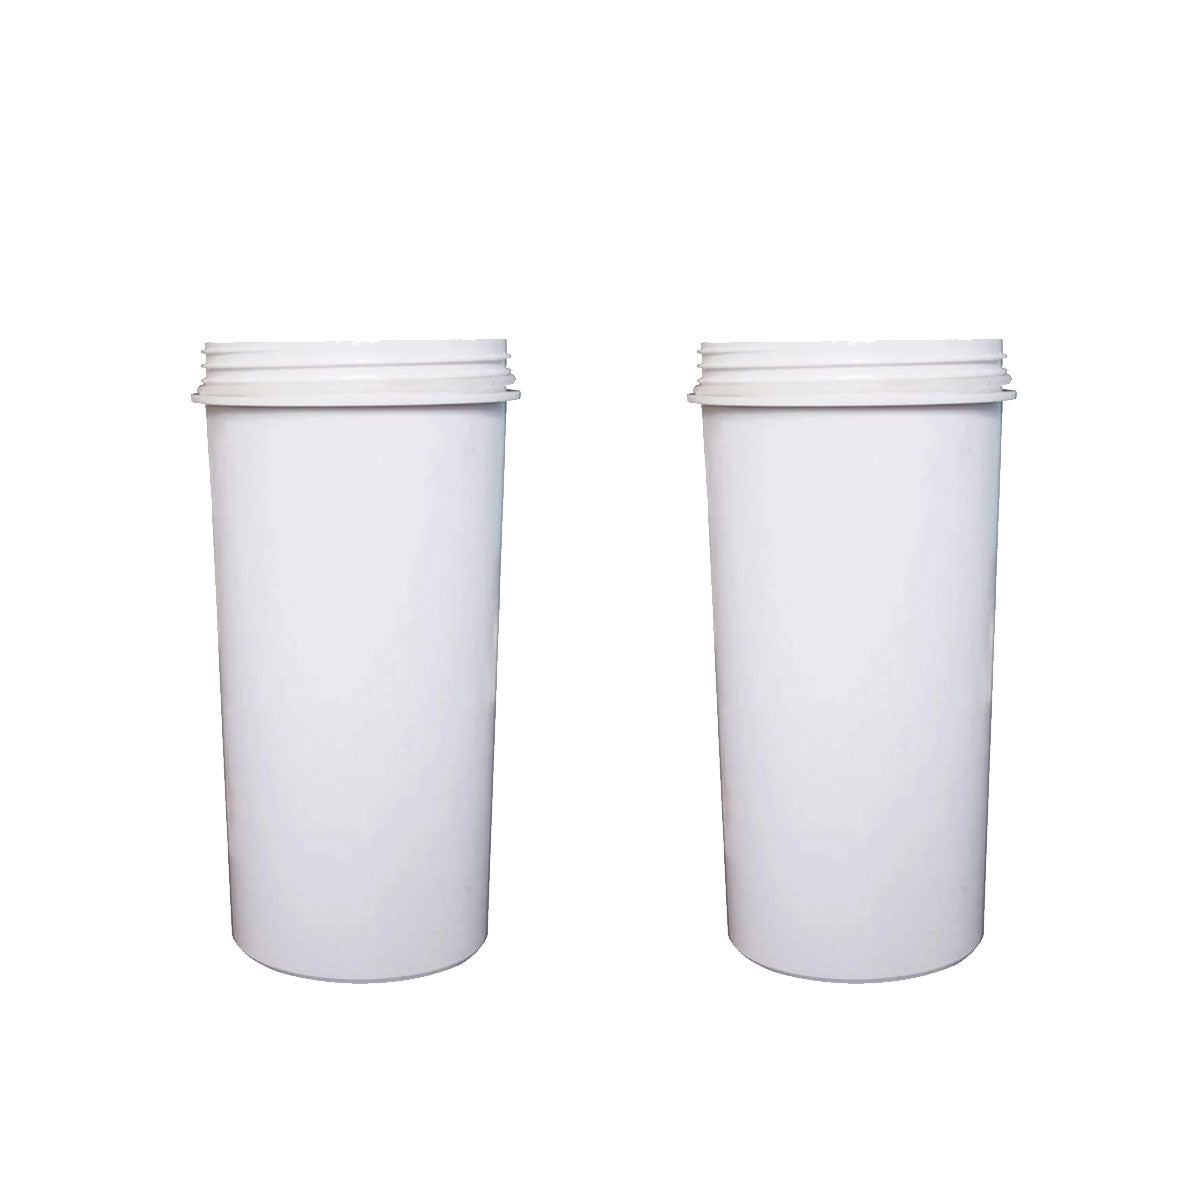 Aimex Water Filter White Filters 2 Pack